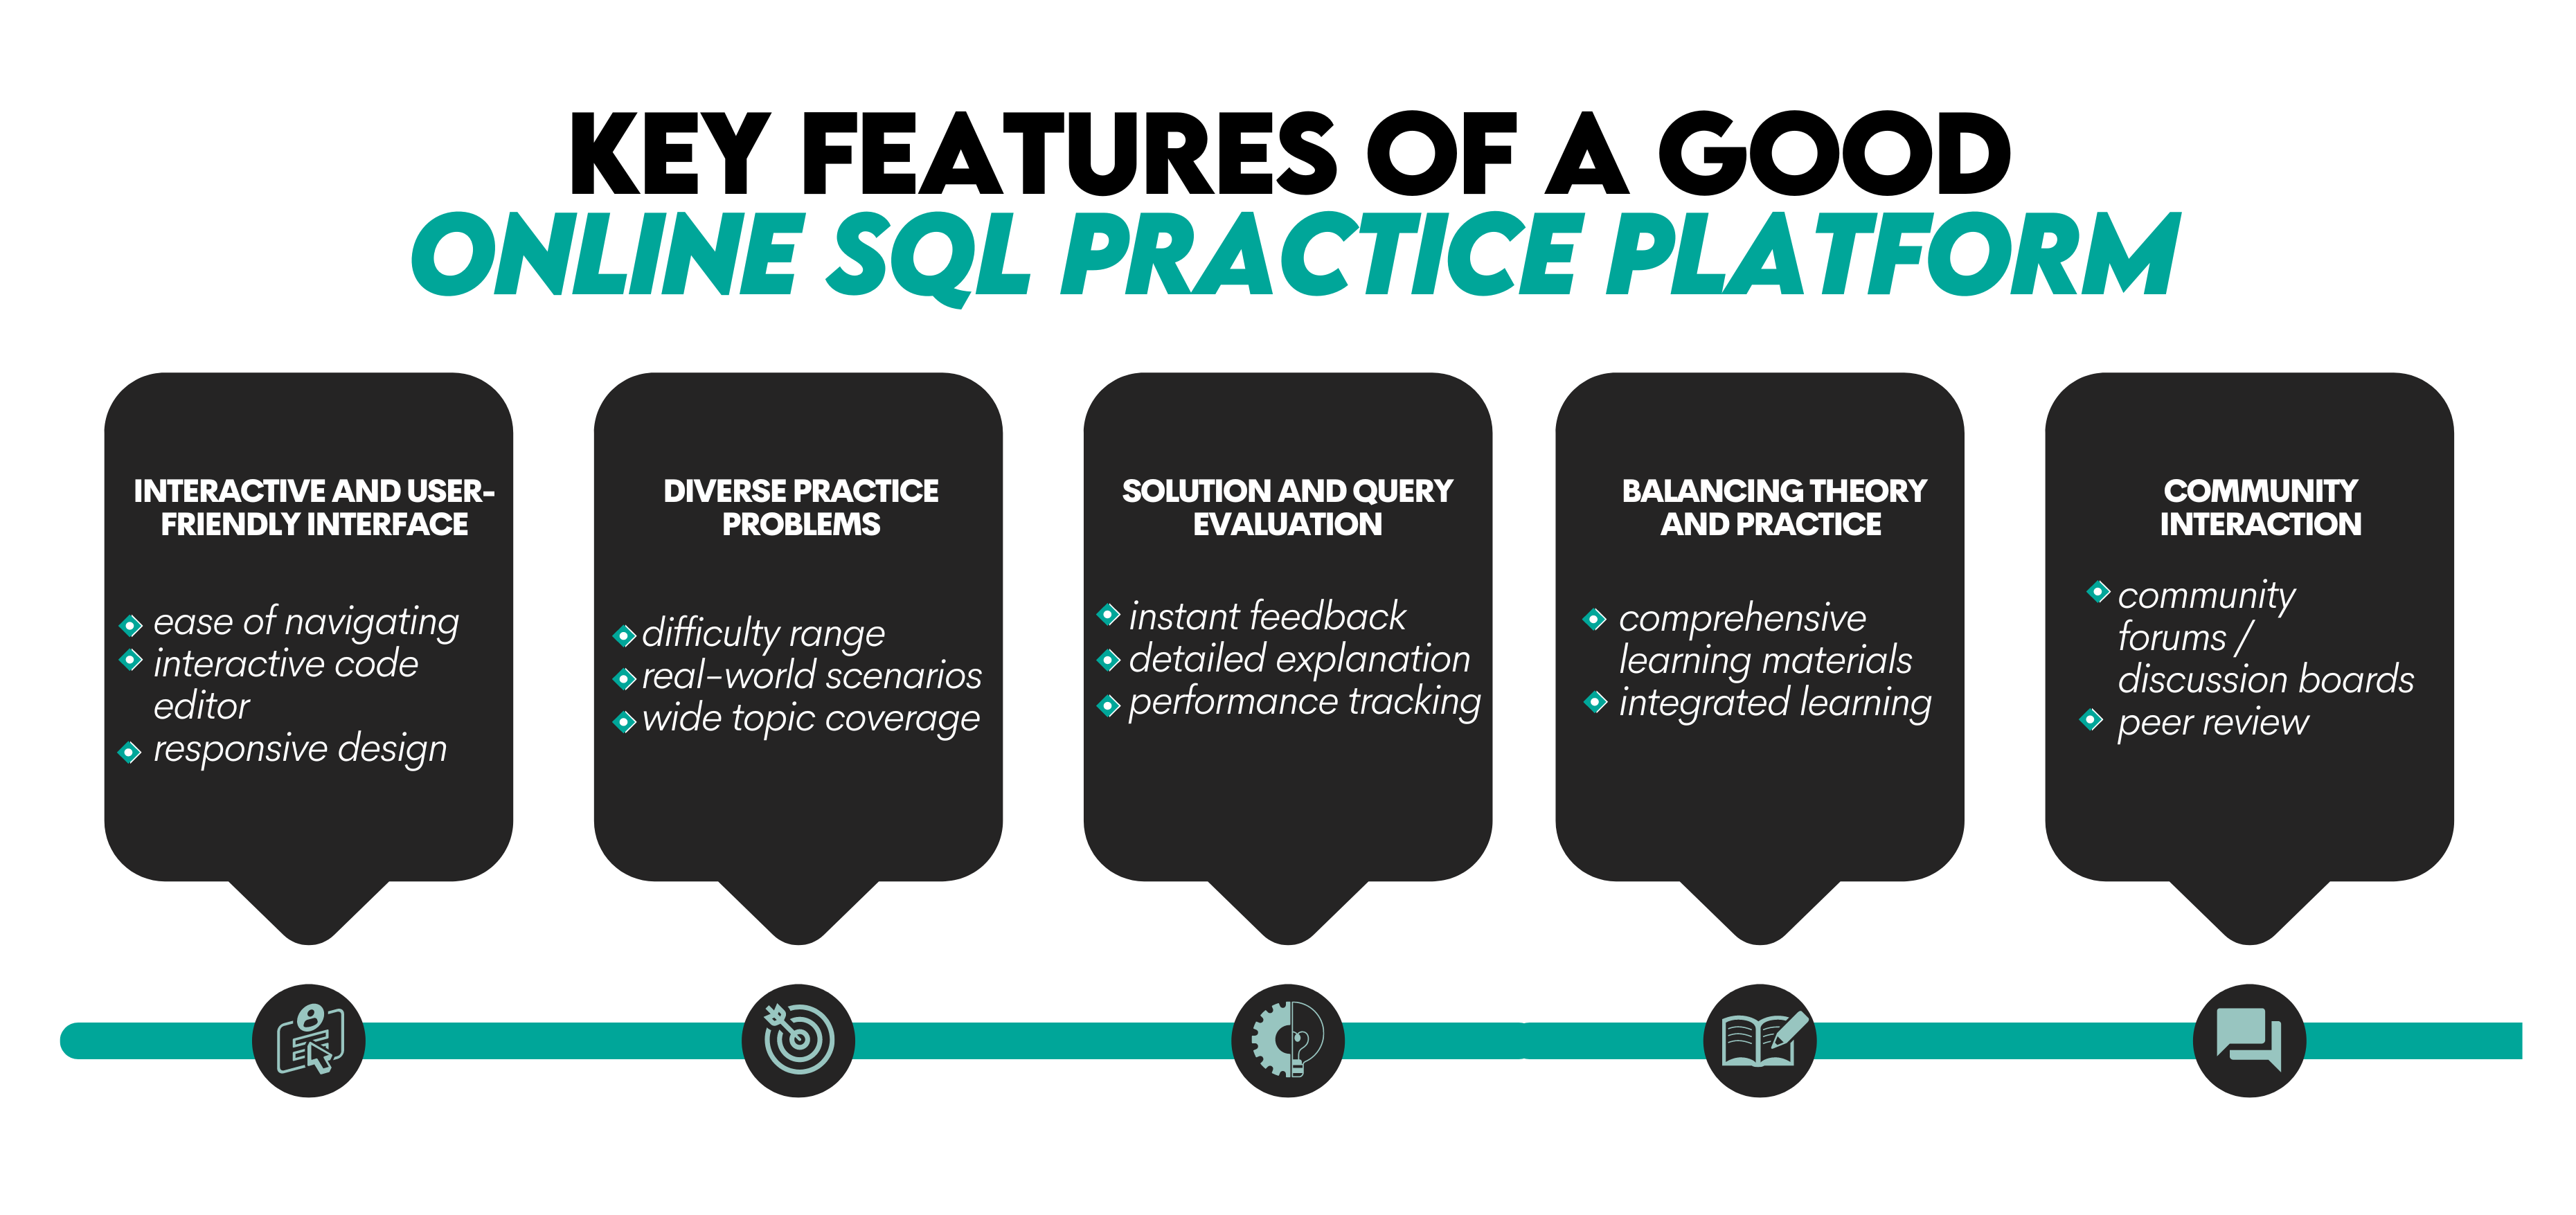 Key Features to Look For in an Online SQL Practice Platform